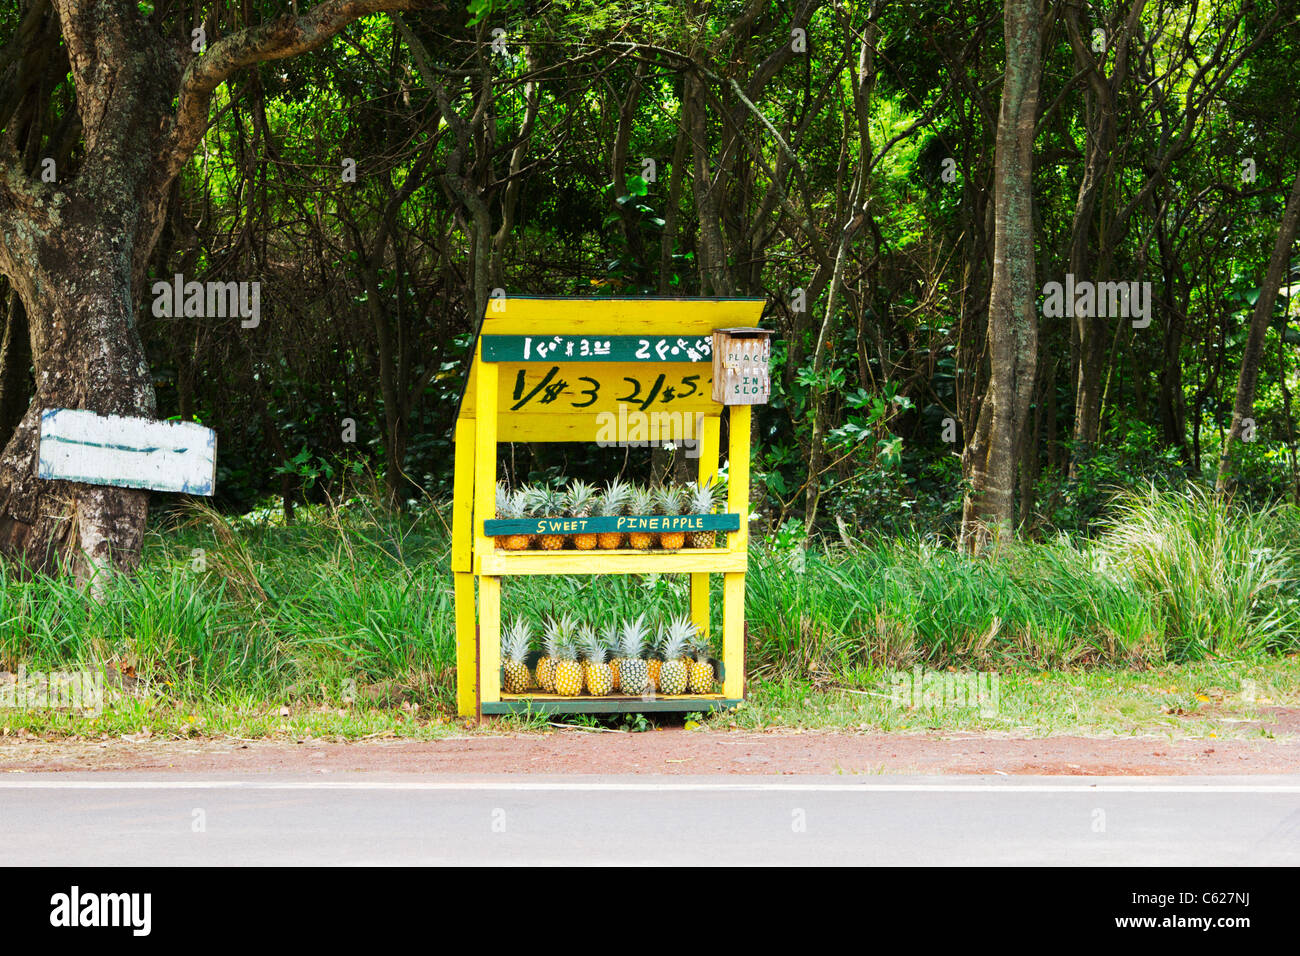 Pinapples for sale at roadside stand Maui Hawaii Stock Photo